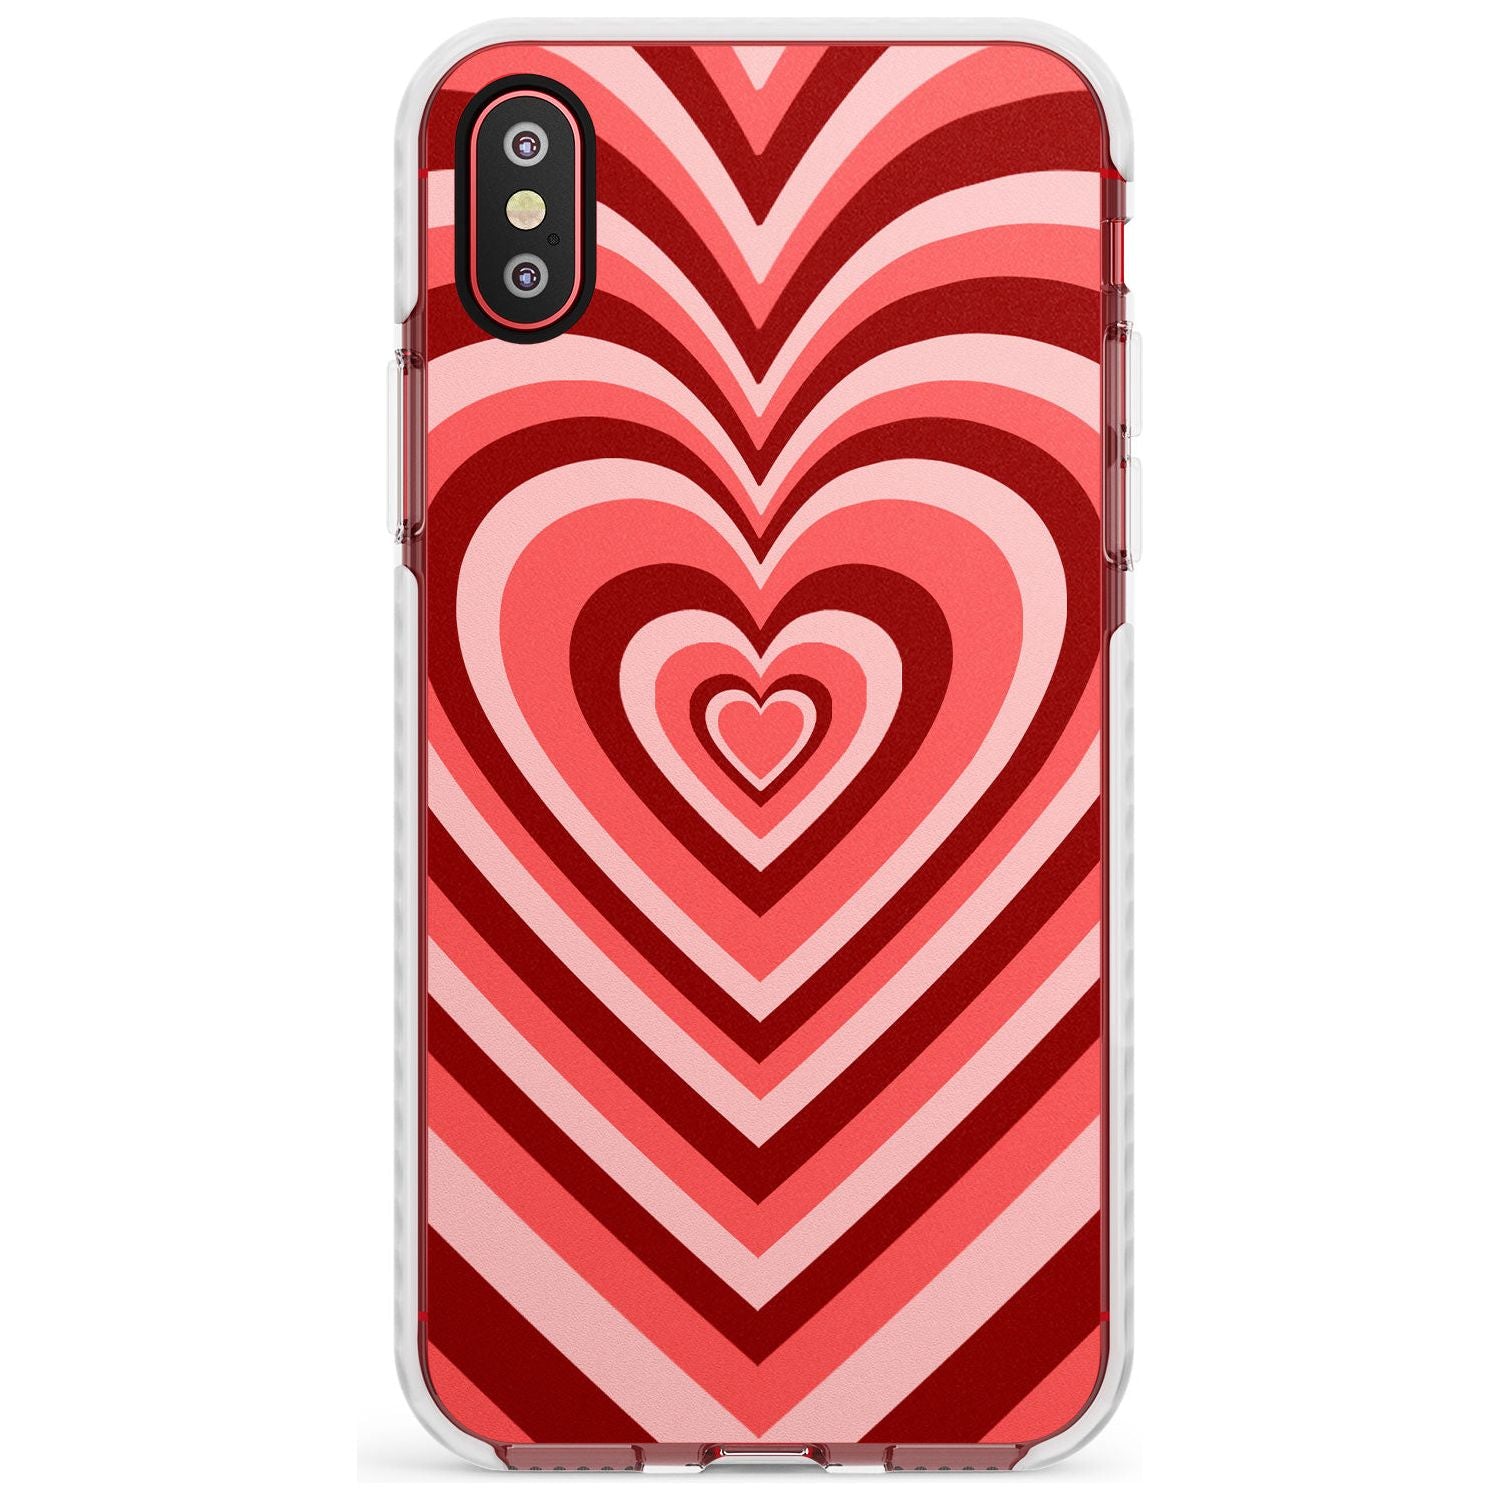 Red Heart Illusion Impact Phone Case for iPhone X XS Max XR